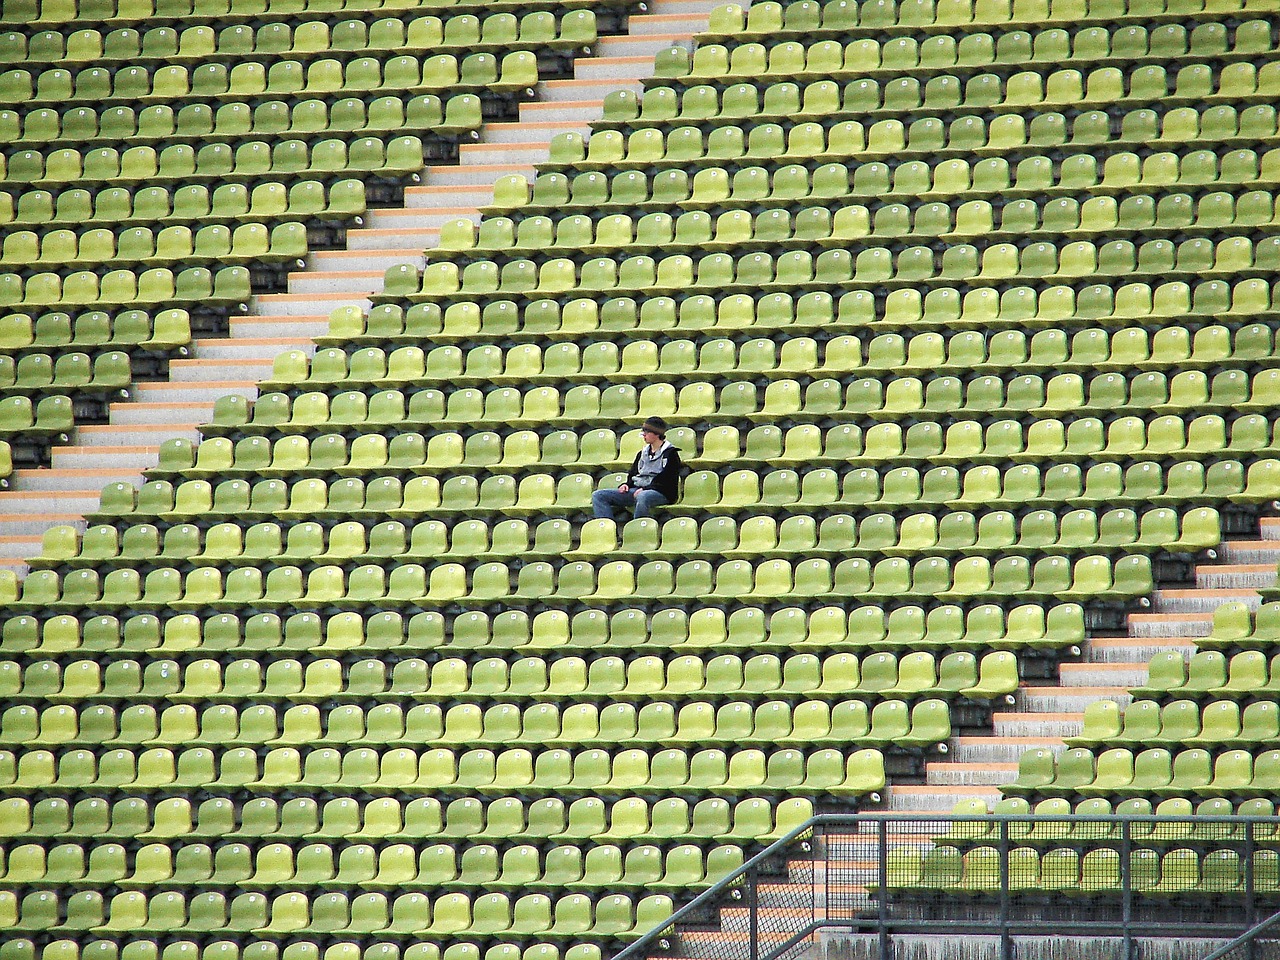 Solitary sitting in an empty stadium